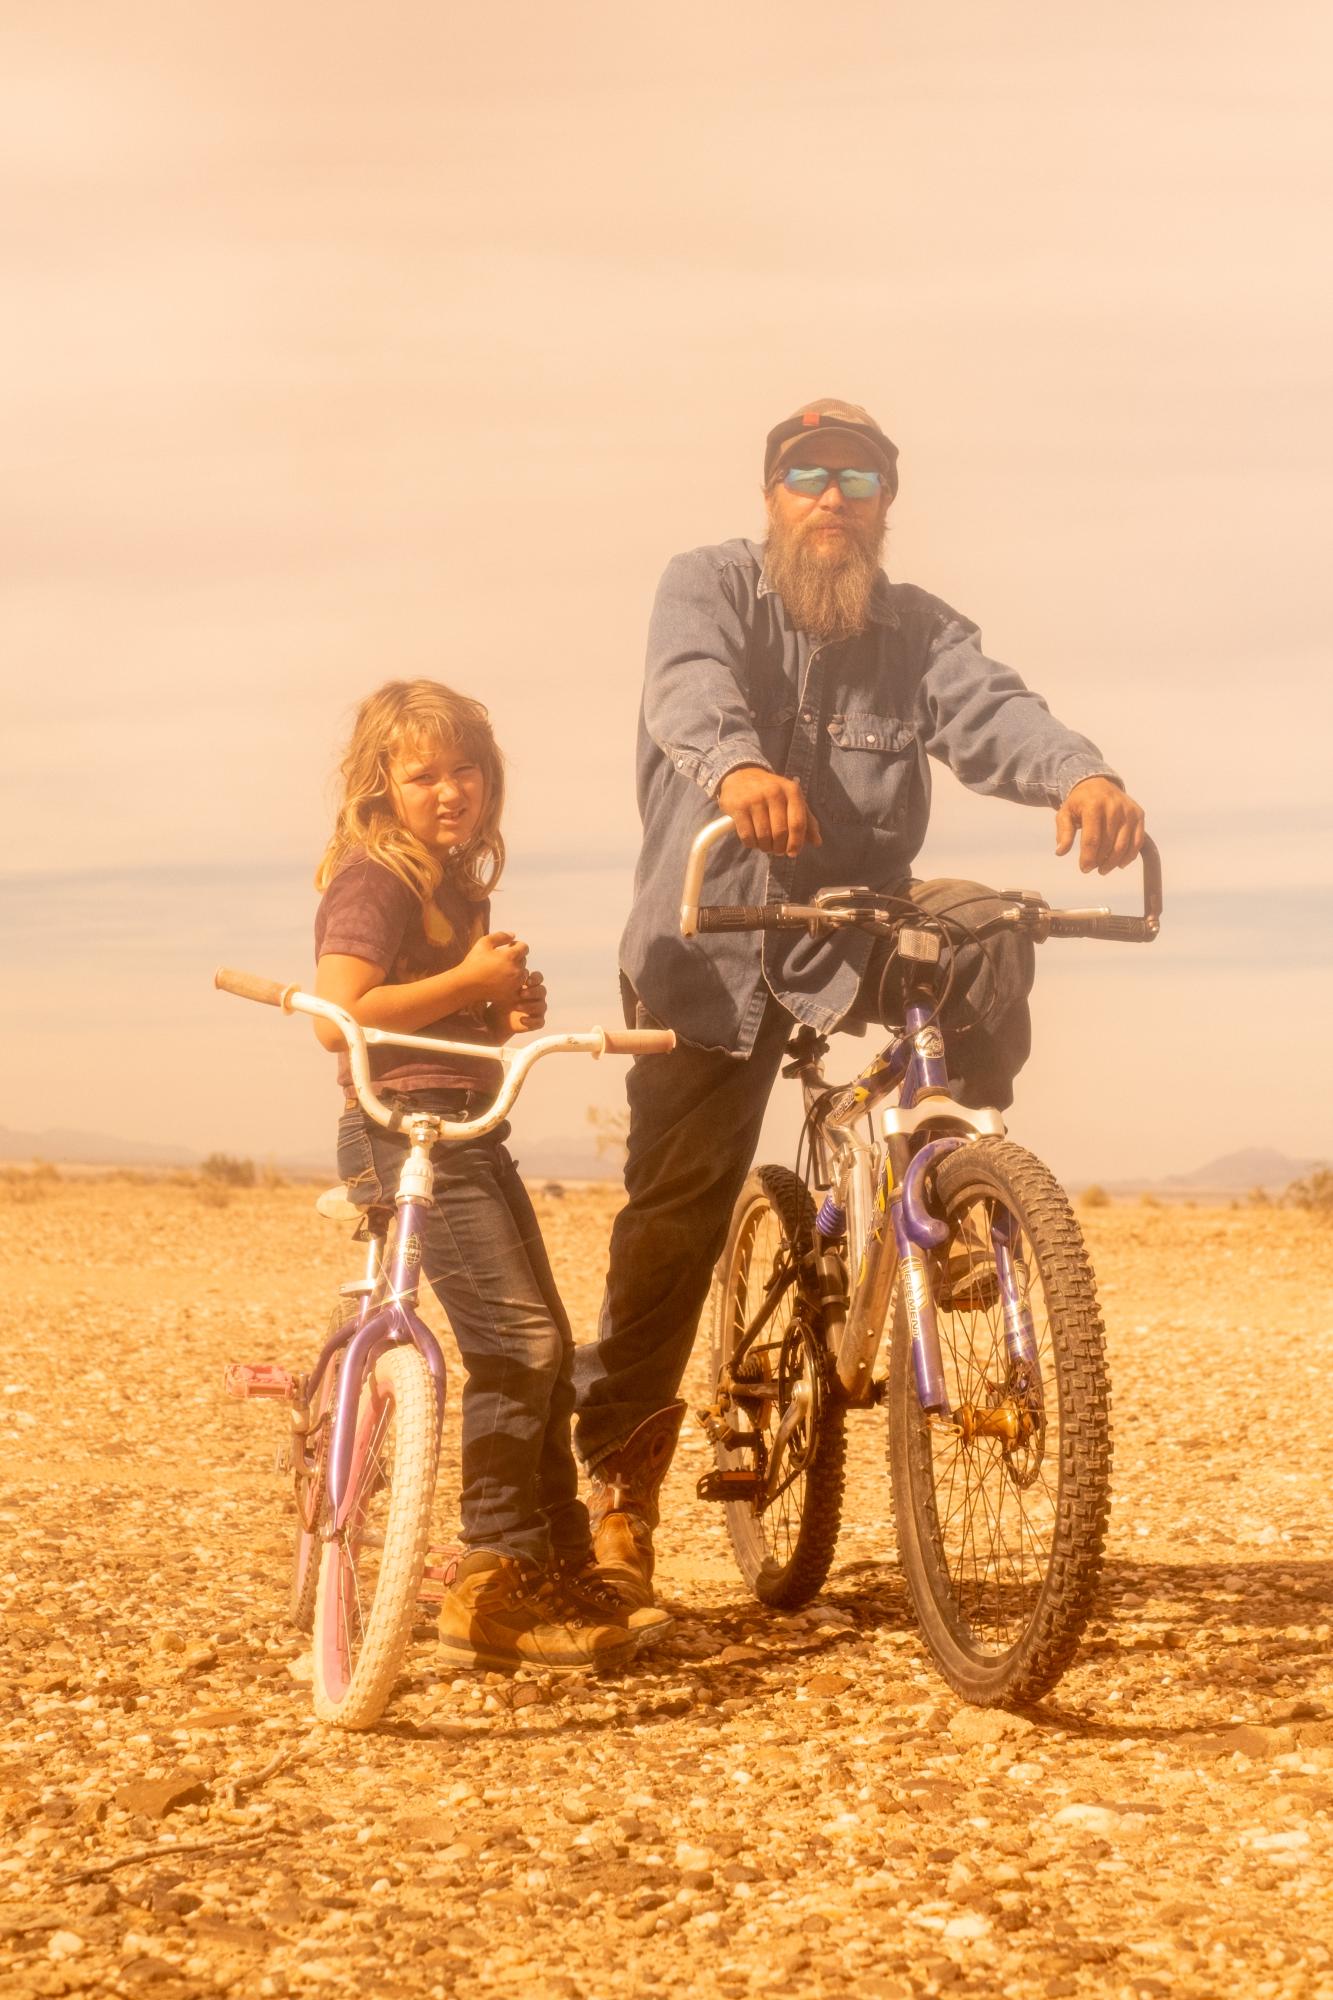 A Warm Winter (An Ongoing Journey) - Lee and his daughter Kathy. Ehrenberg, Arizona.